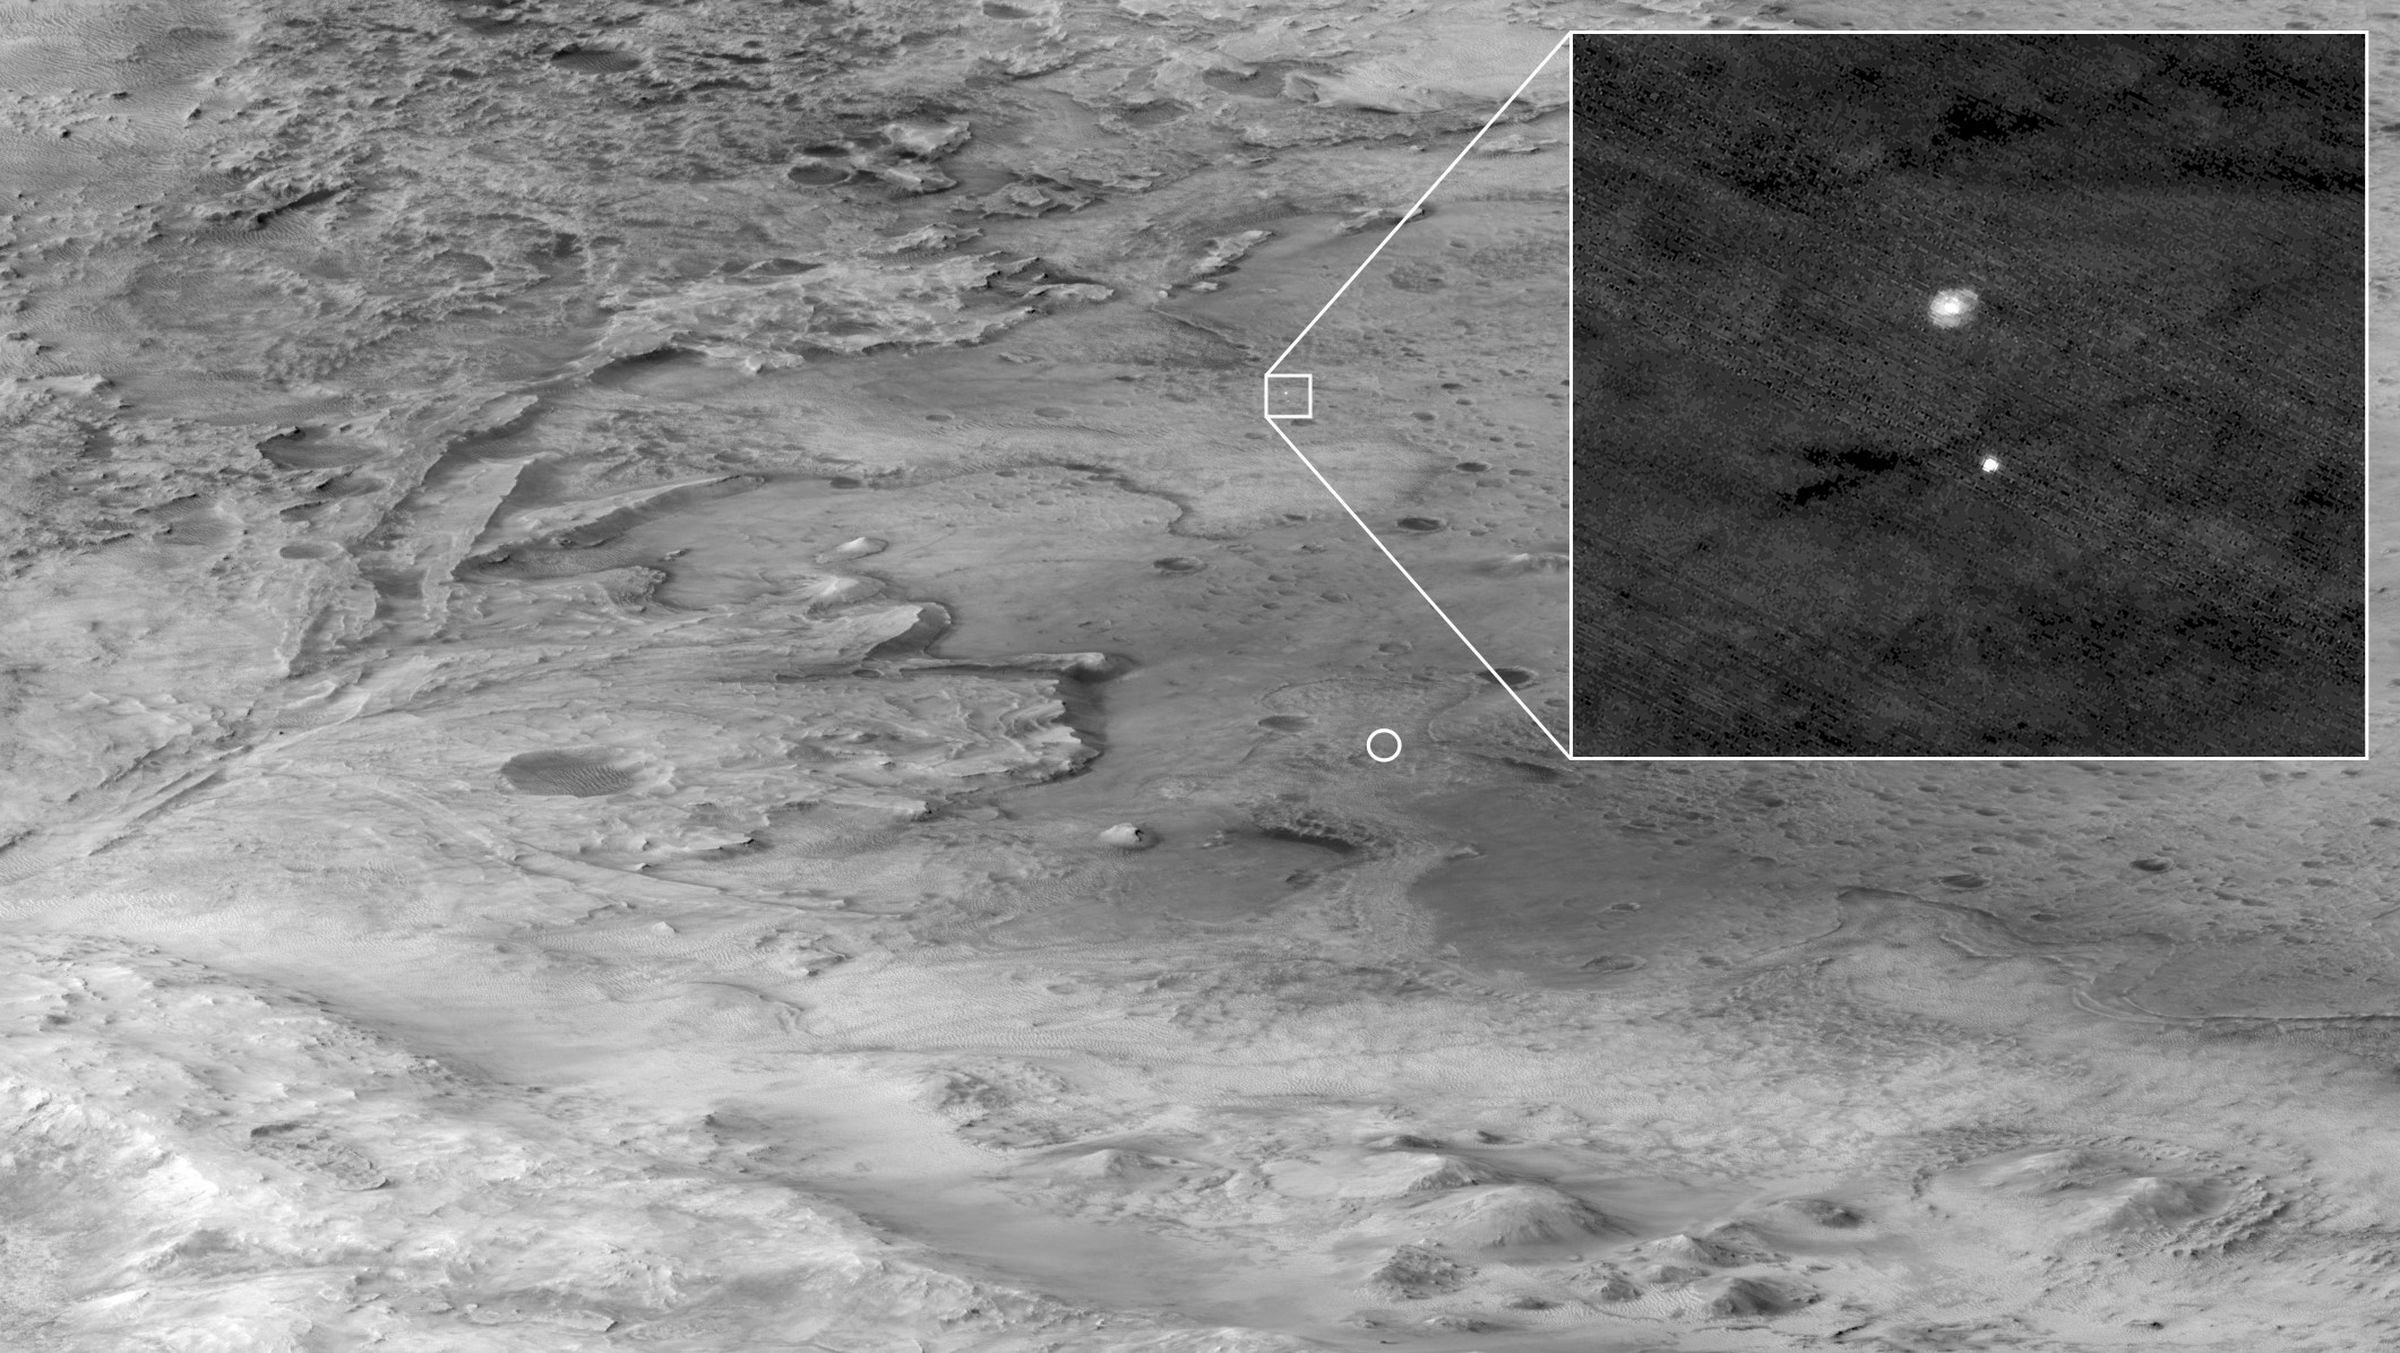 An image captured by the Mars Reconnaissance Orbiter shows Perseverance descending under its parachute moments before landing.